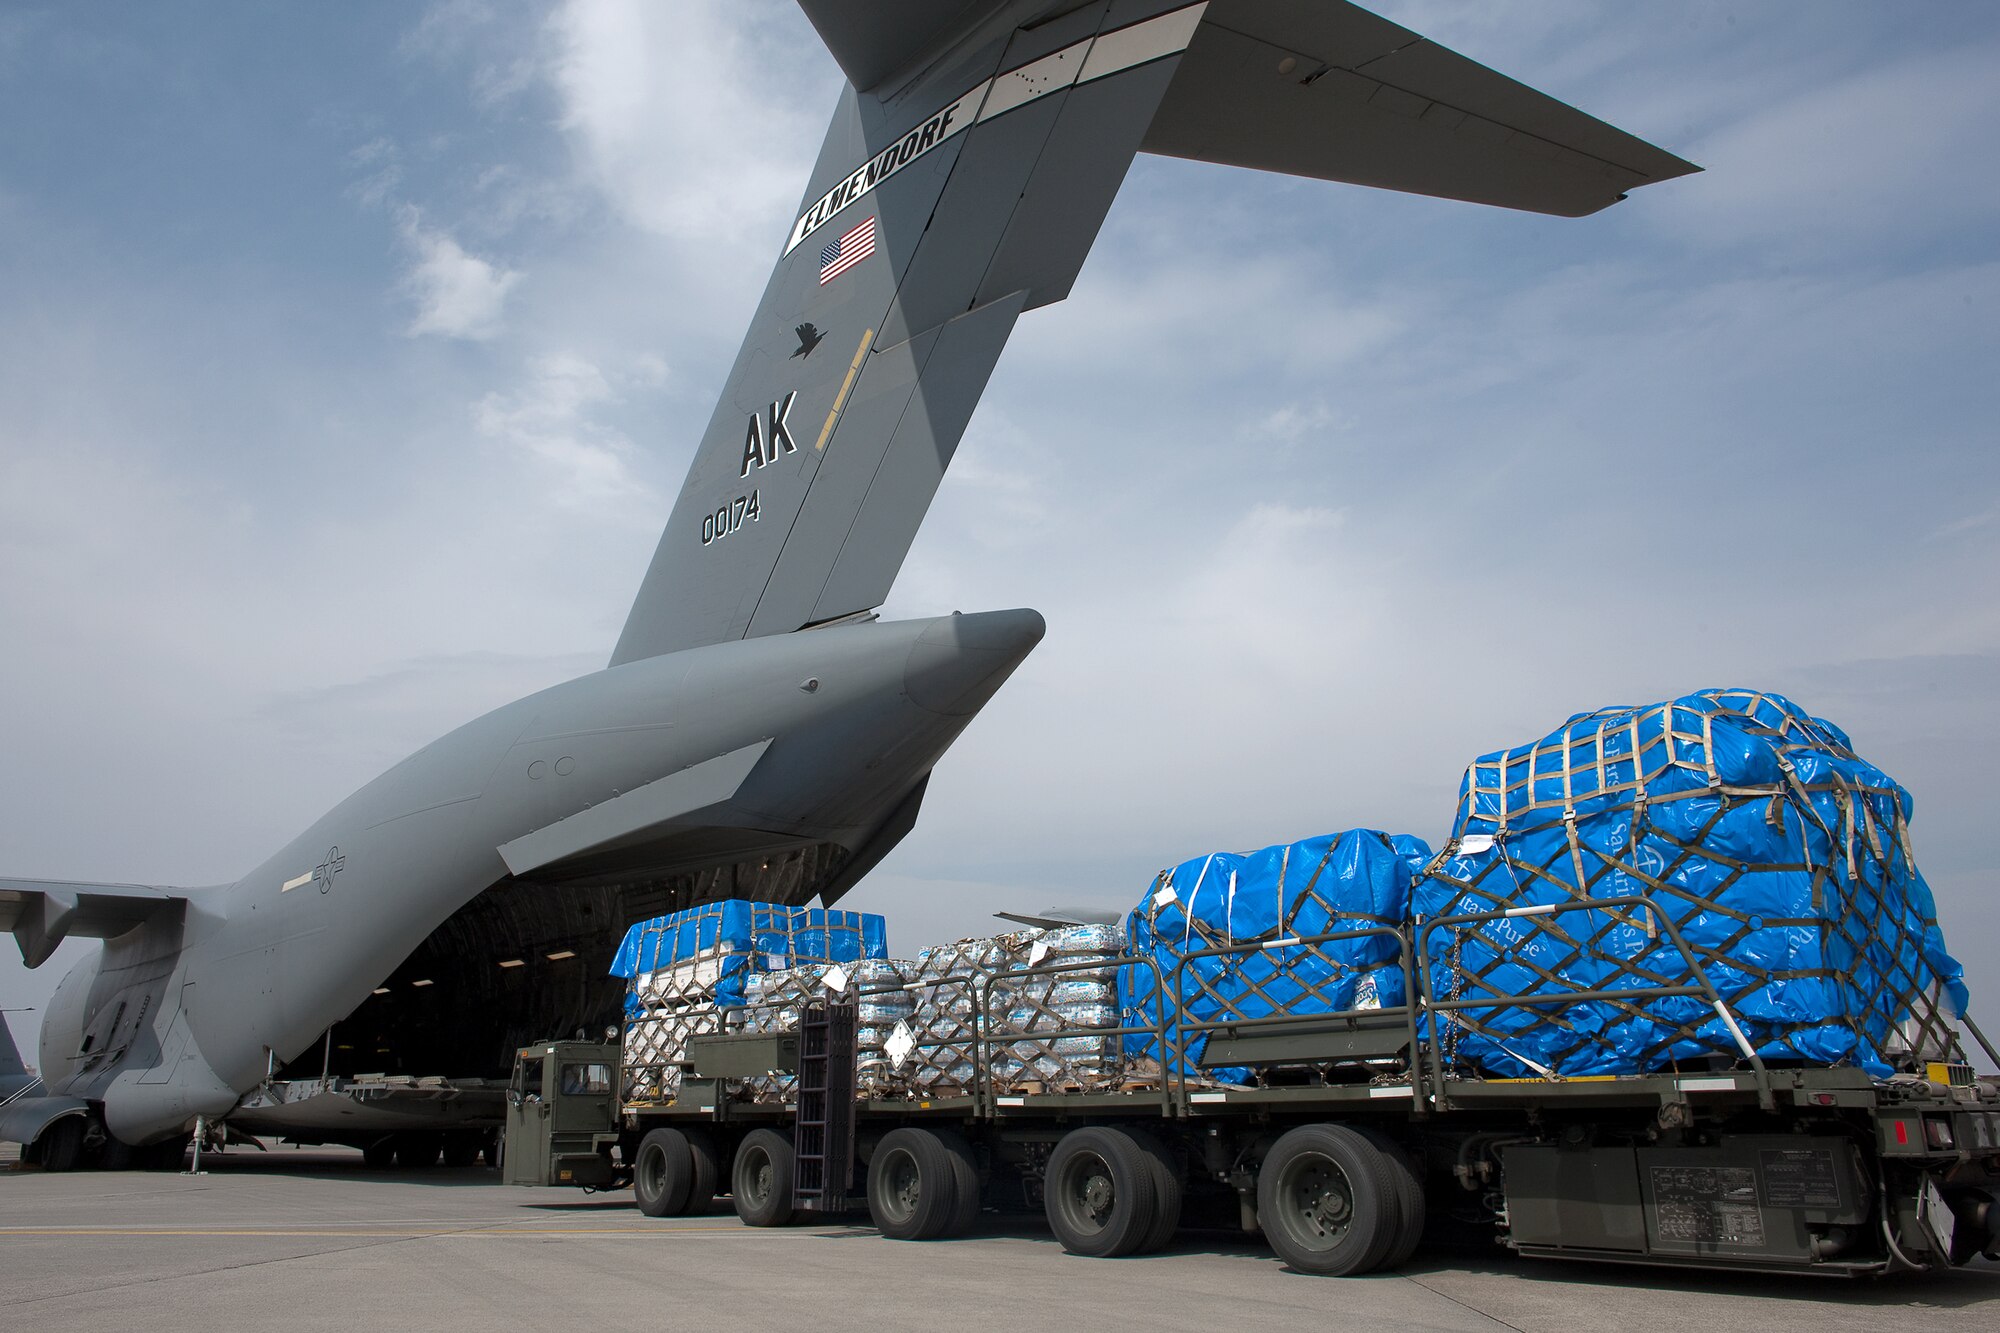 YOKOTA AIR BASE, Japan -- Members of the 730th Air Mobility Squadron load ten pallets of water, food and blankets onto a C-17 Globalmaster III aircraft here March 20. These were the first humanitarian relief supplies to be delivered to Sendai. (U.S. Air Force photo/Osakabe Yasuo)